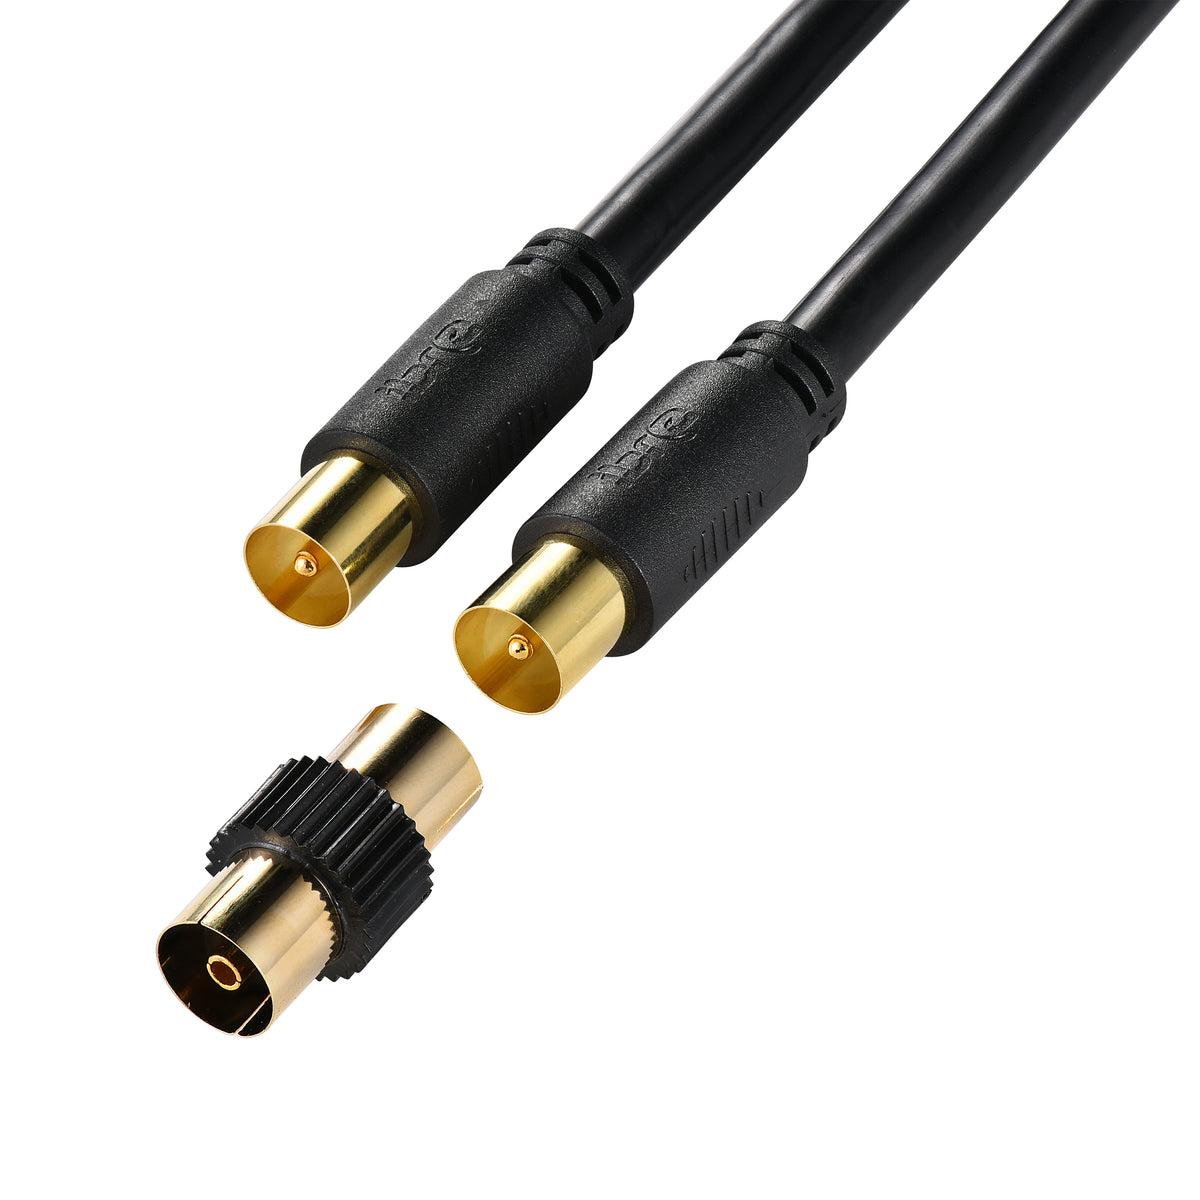 IBRA Aerial Coaxial Cable 7.5M with Gold-Plated Connectors, Male to Male RF Coax Lead with Female Adapter Coupler for Freeview, Freesat, Sky, Virgin, BT, You View, Satellite TV - Black